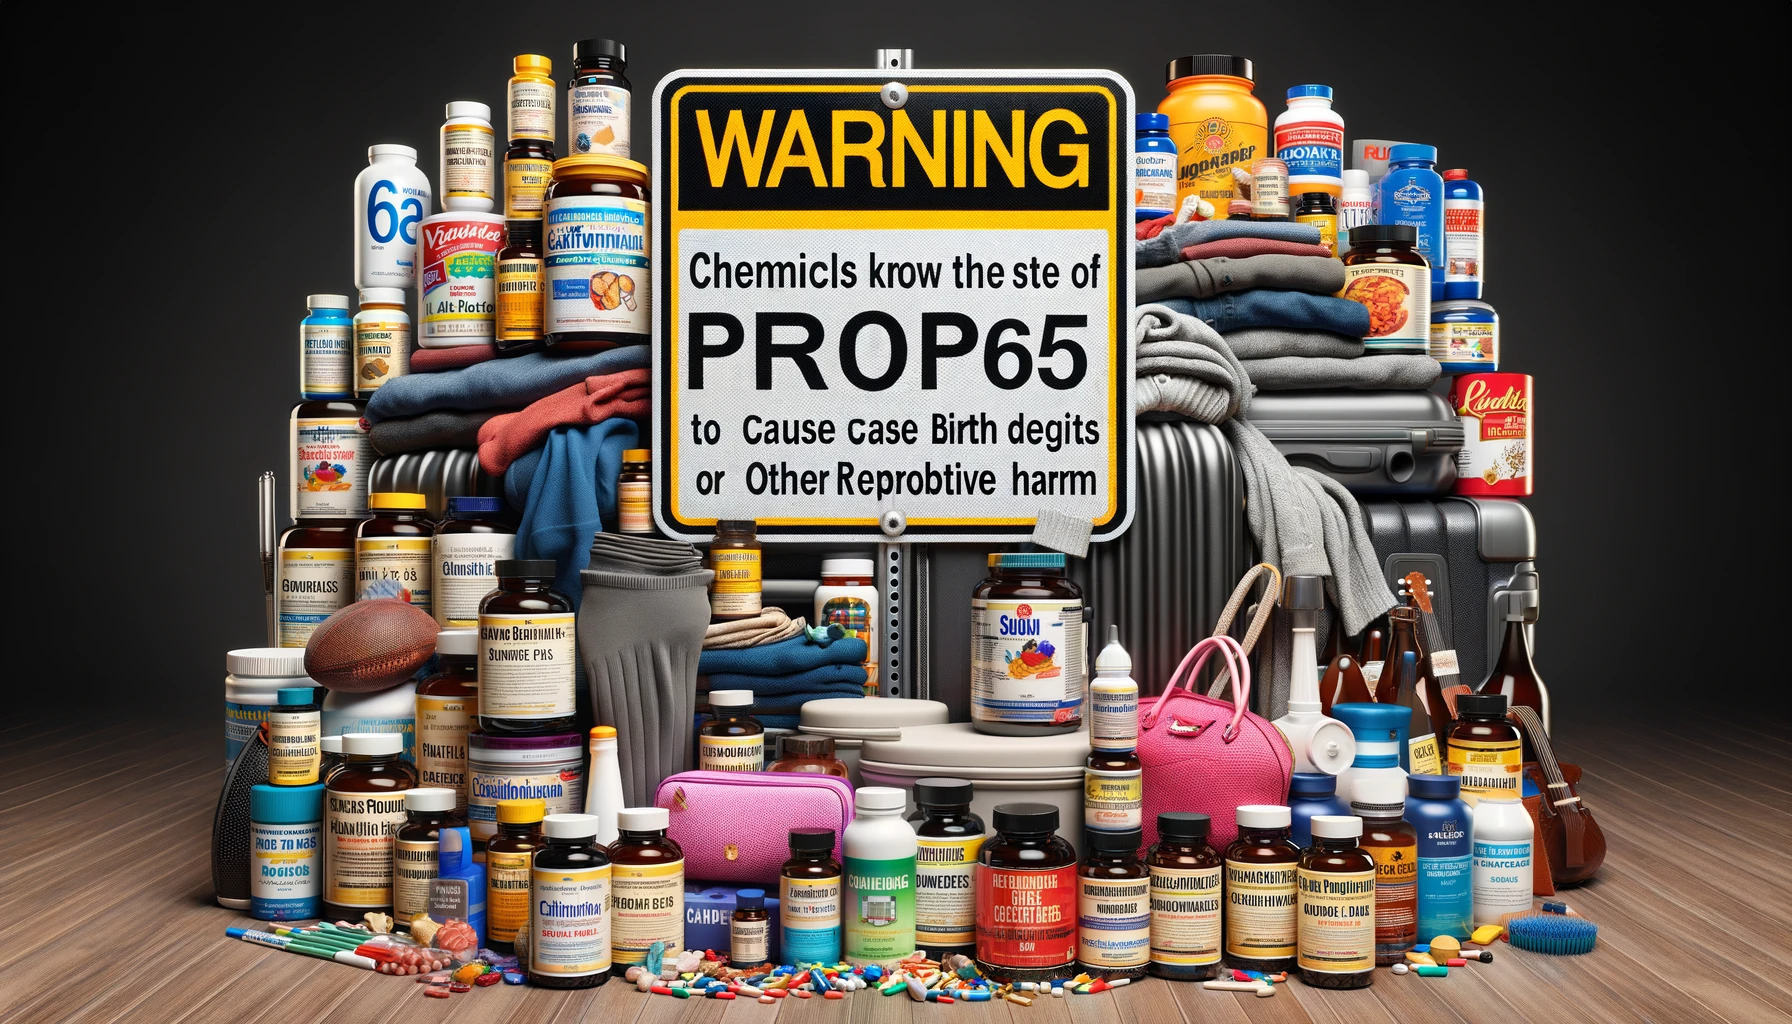 Claim: Products labeled with Proposition 65 warnings contain chemicals at levels that pose a significant risk of cancer or reproductive harm, based on current scientific understanding.